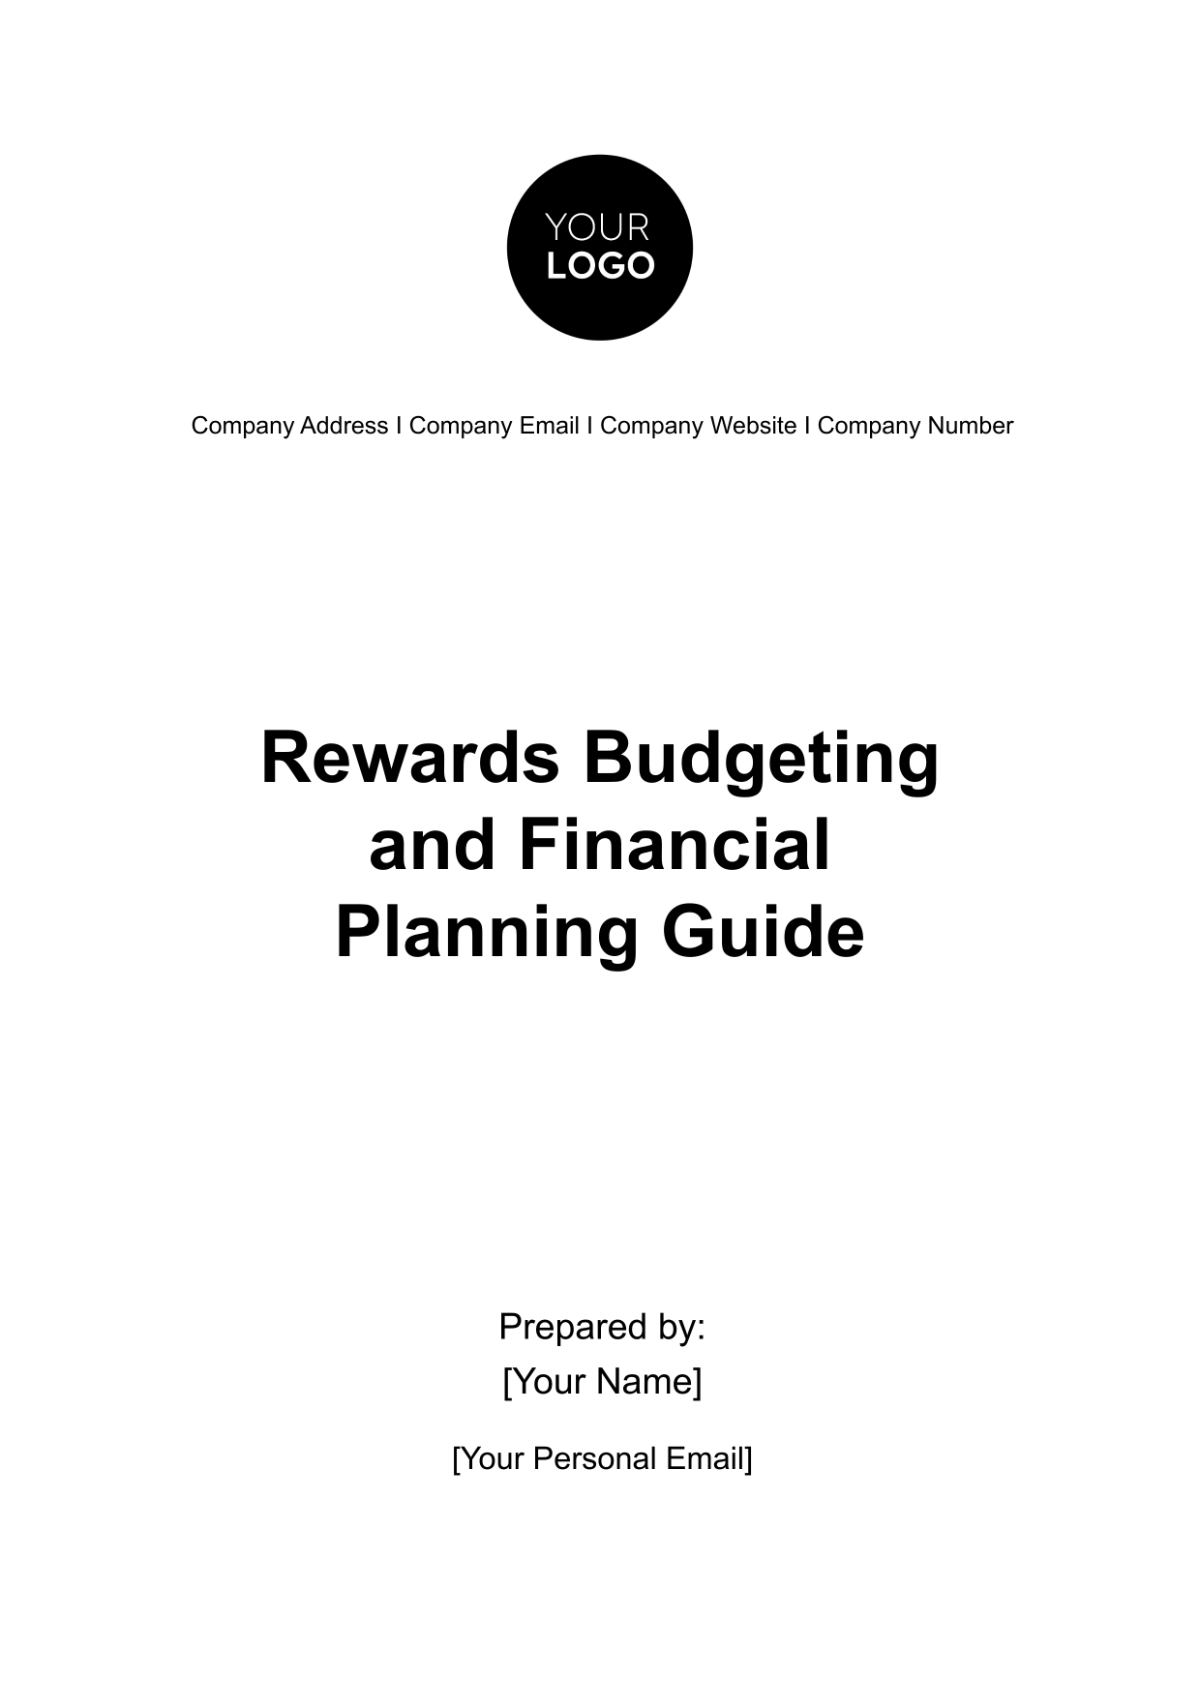 Rewards Budgeting and Financial Planning Guide HR Template